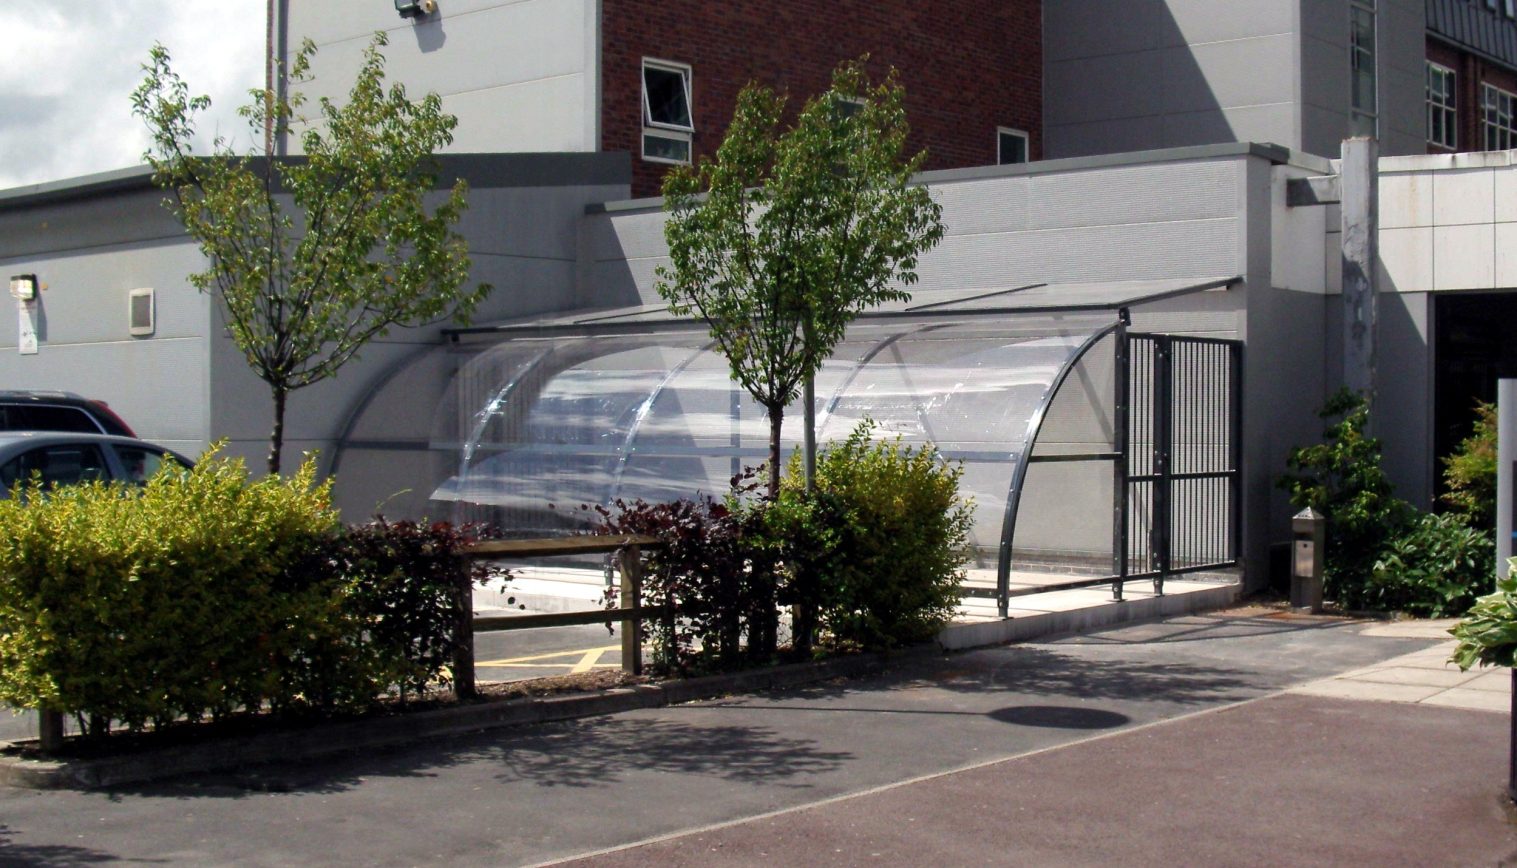 Sir Tom Finney Sports Centre – Bespoke Cycle Shelter